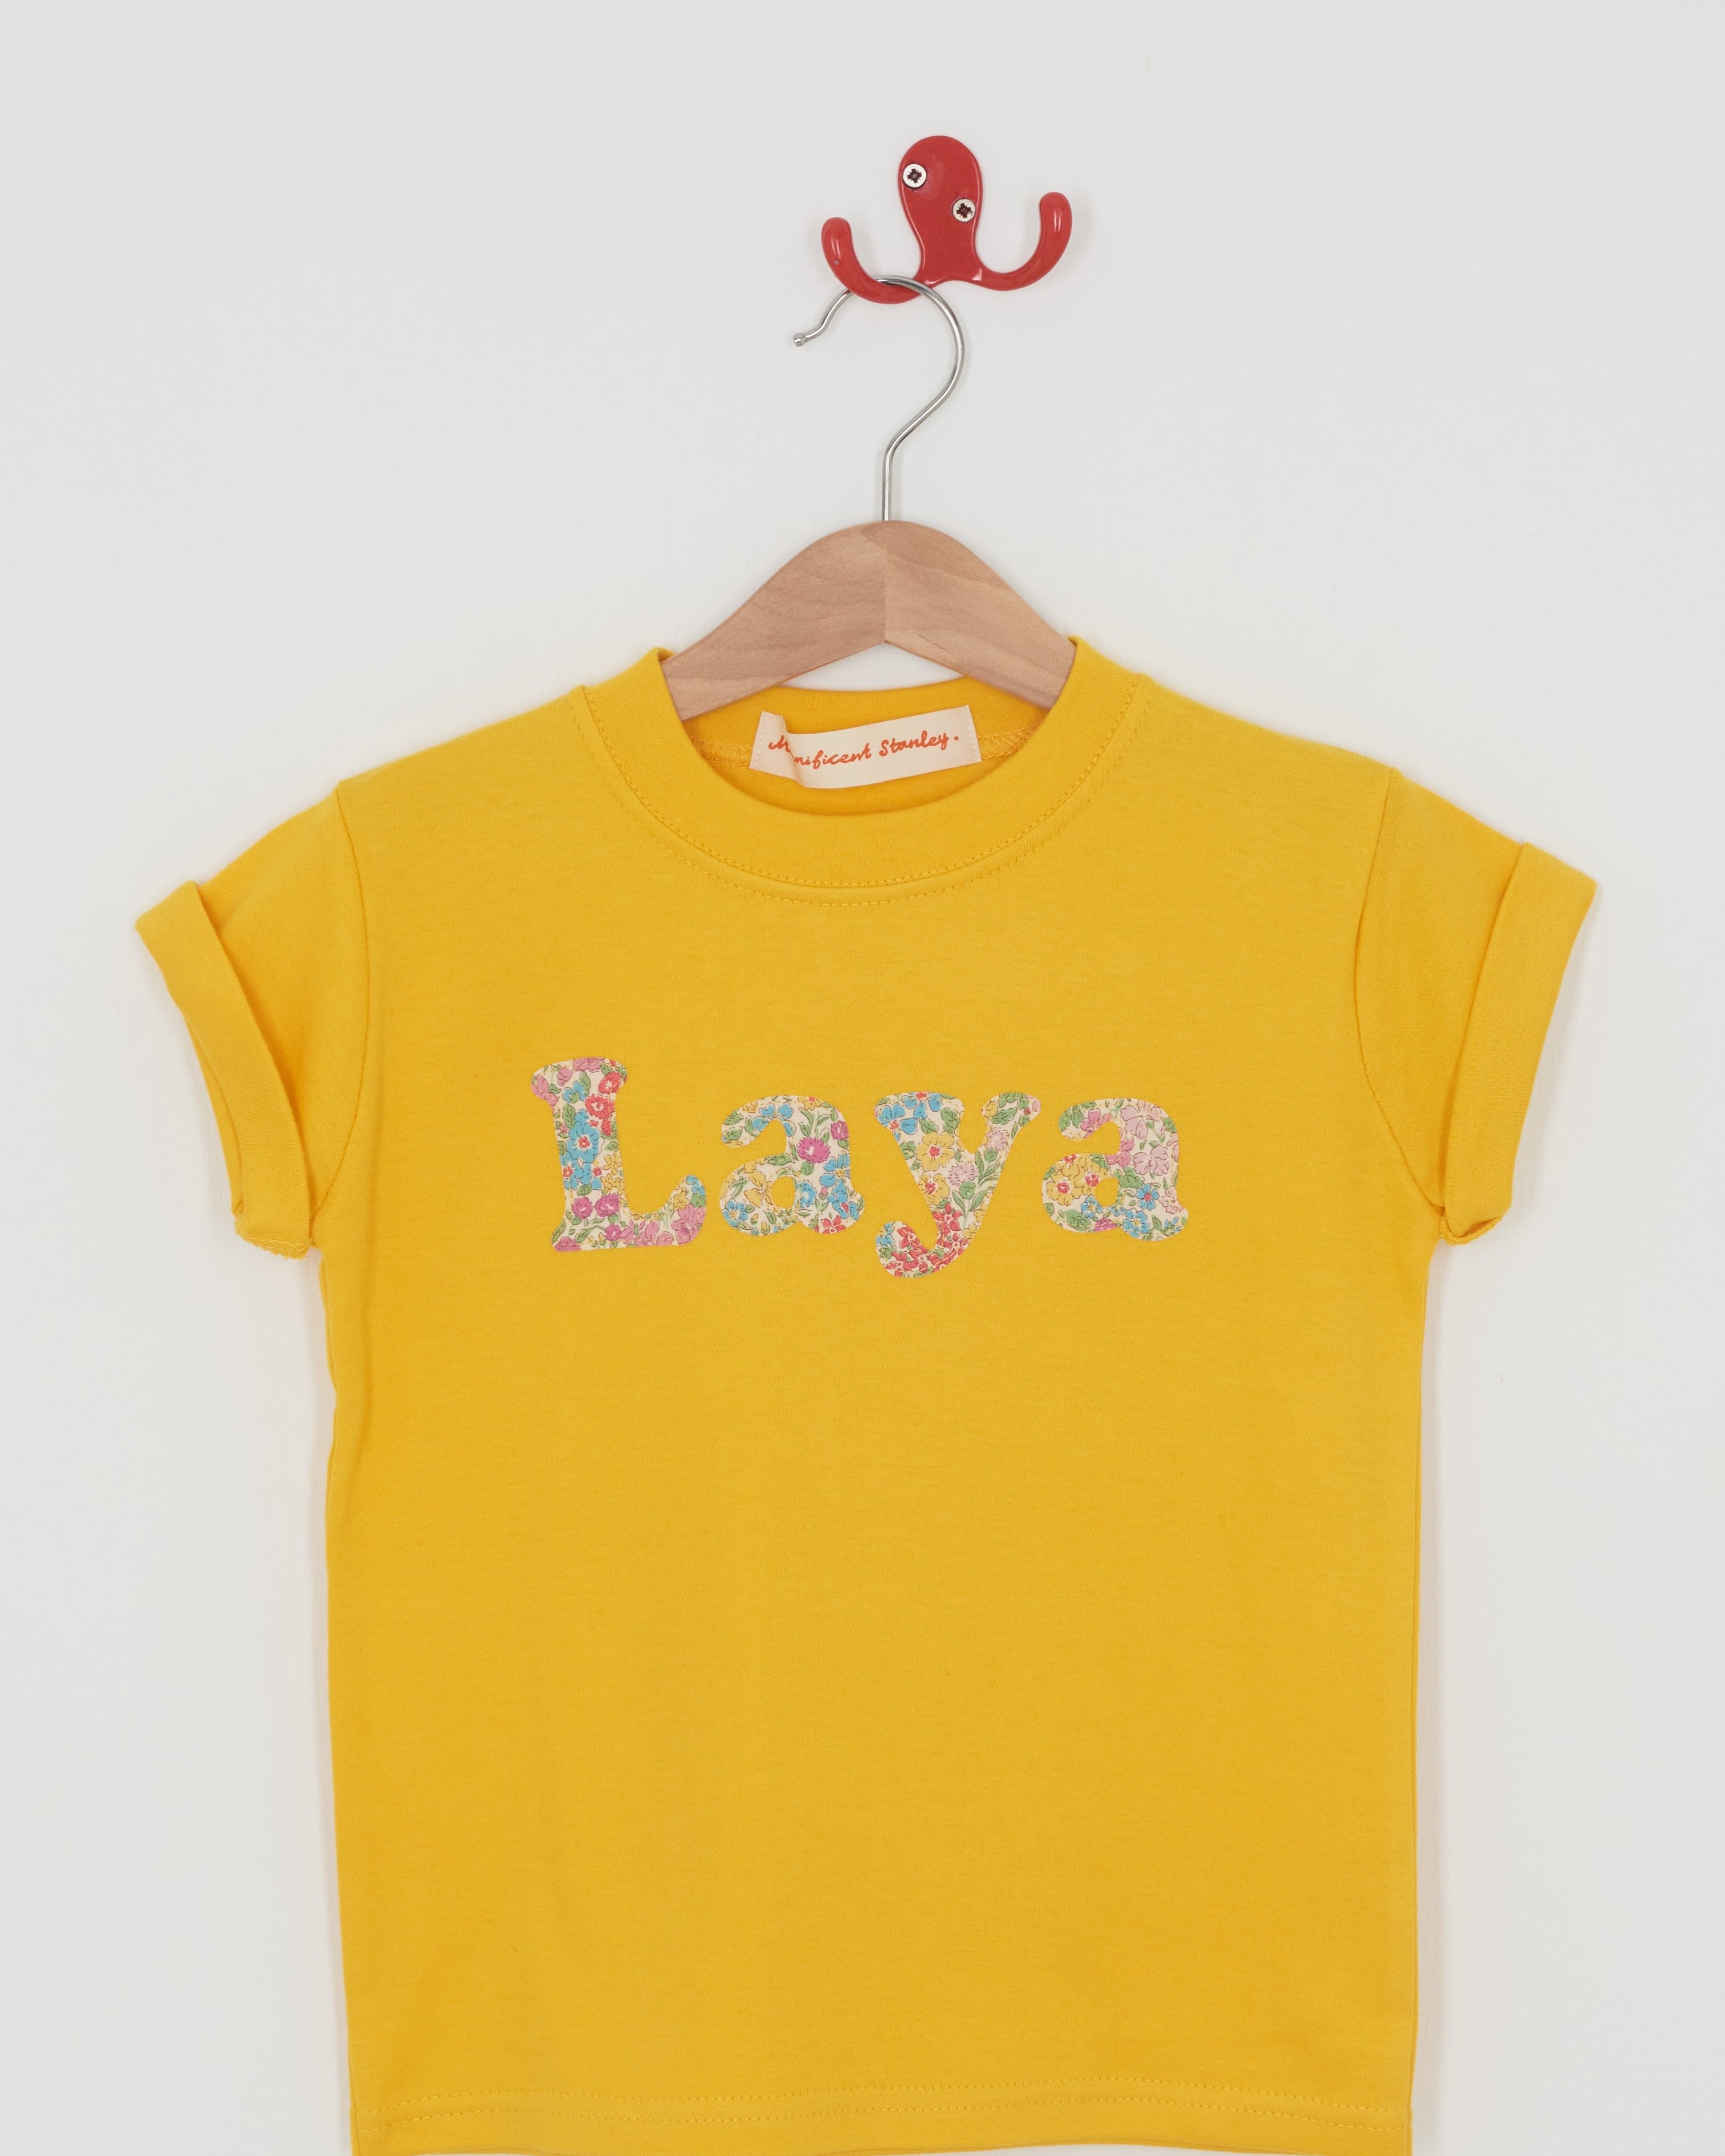 Magnificent Stanley Tee Lowercase Name Yellow T-Shirt in Choice of Liberty Print